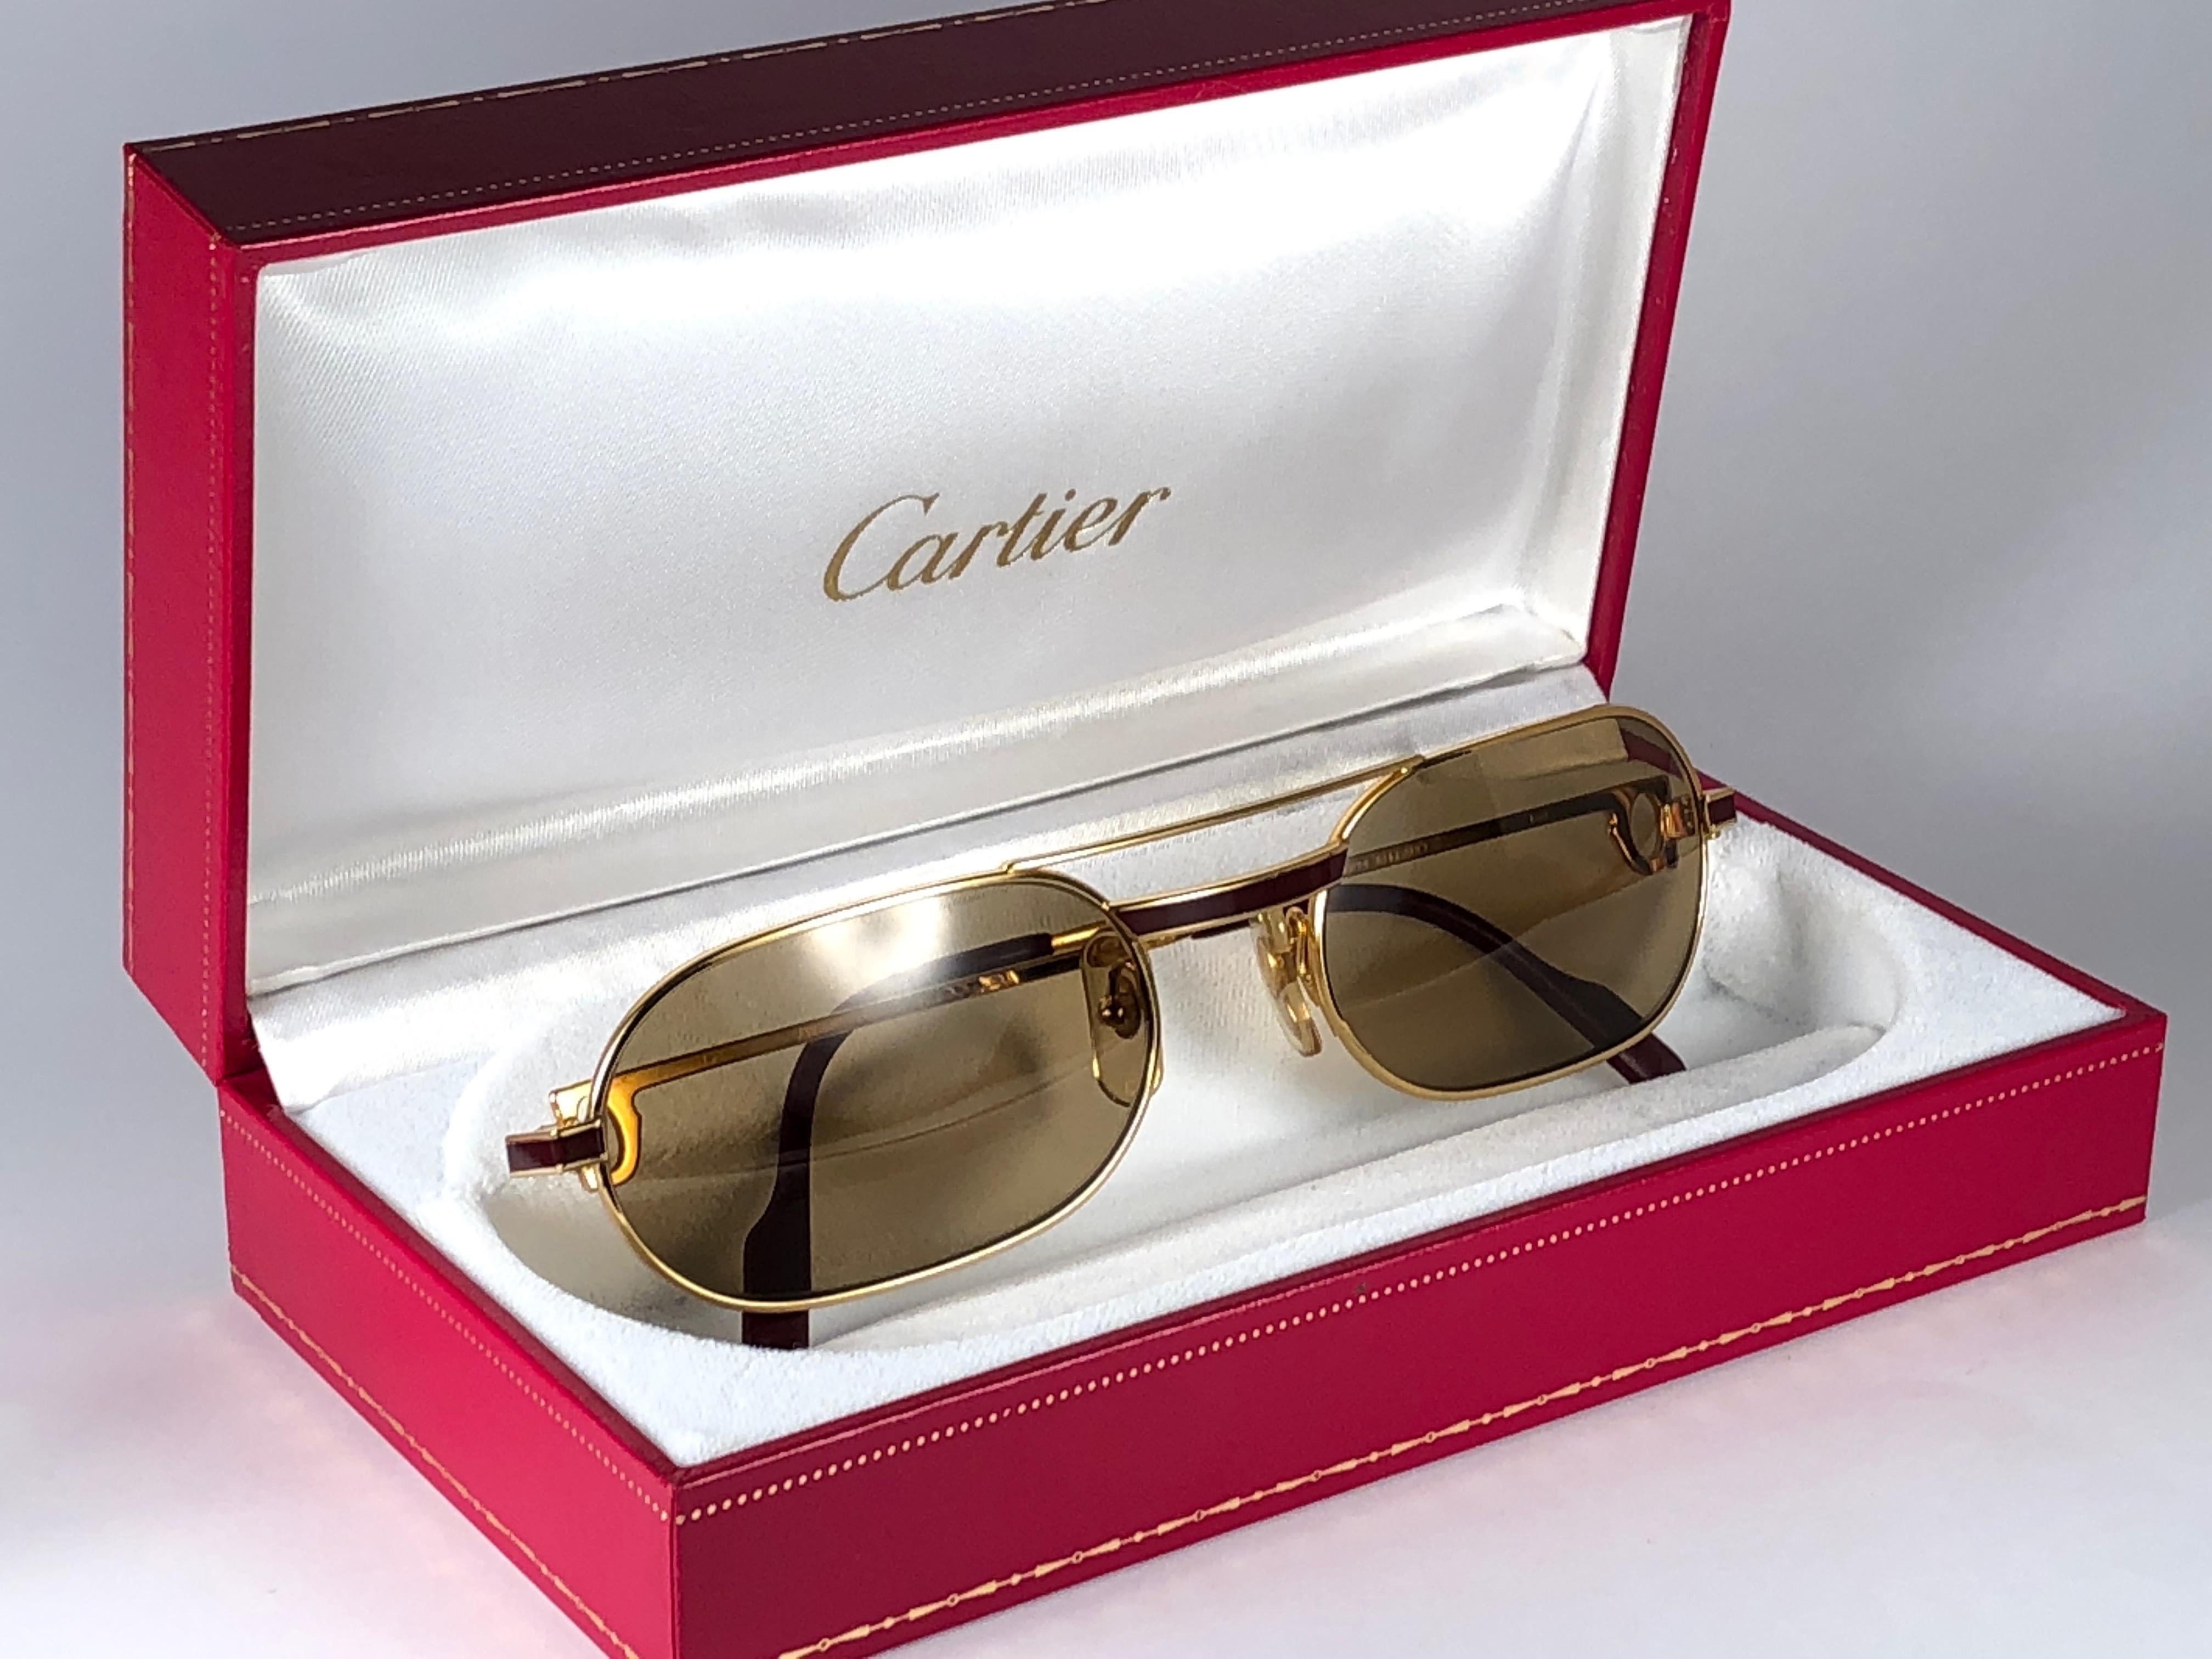 
Original 1983 Cartier Louis Cartier Laque De Chine sunglasses with original Cartier honey brown lenses.  All hallmarks. Red enamel with Cartier gold signs on the burgundy ear paddles. Both arms sport the C from Cartier on the temple. These are like